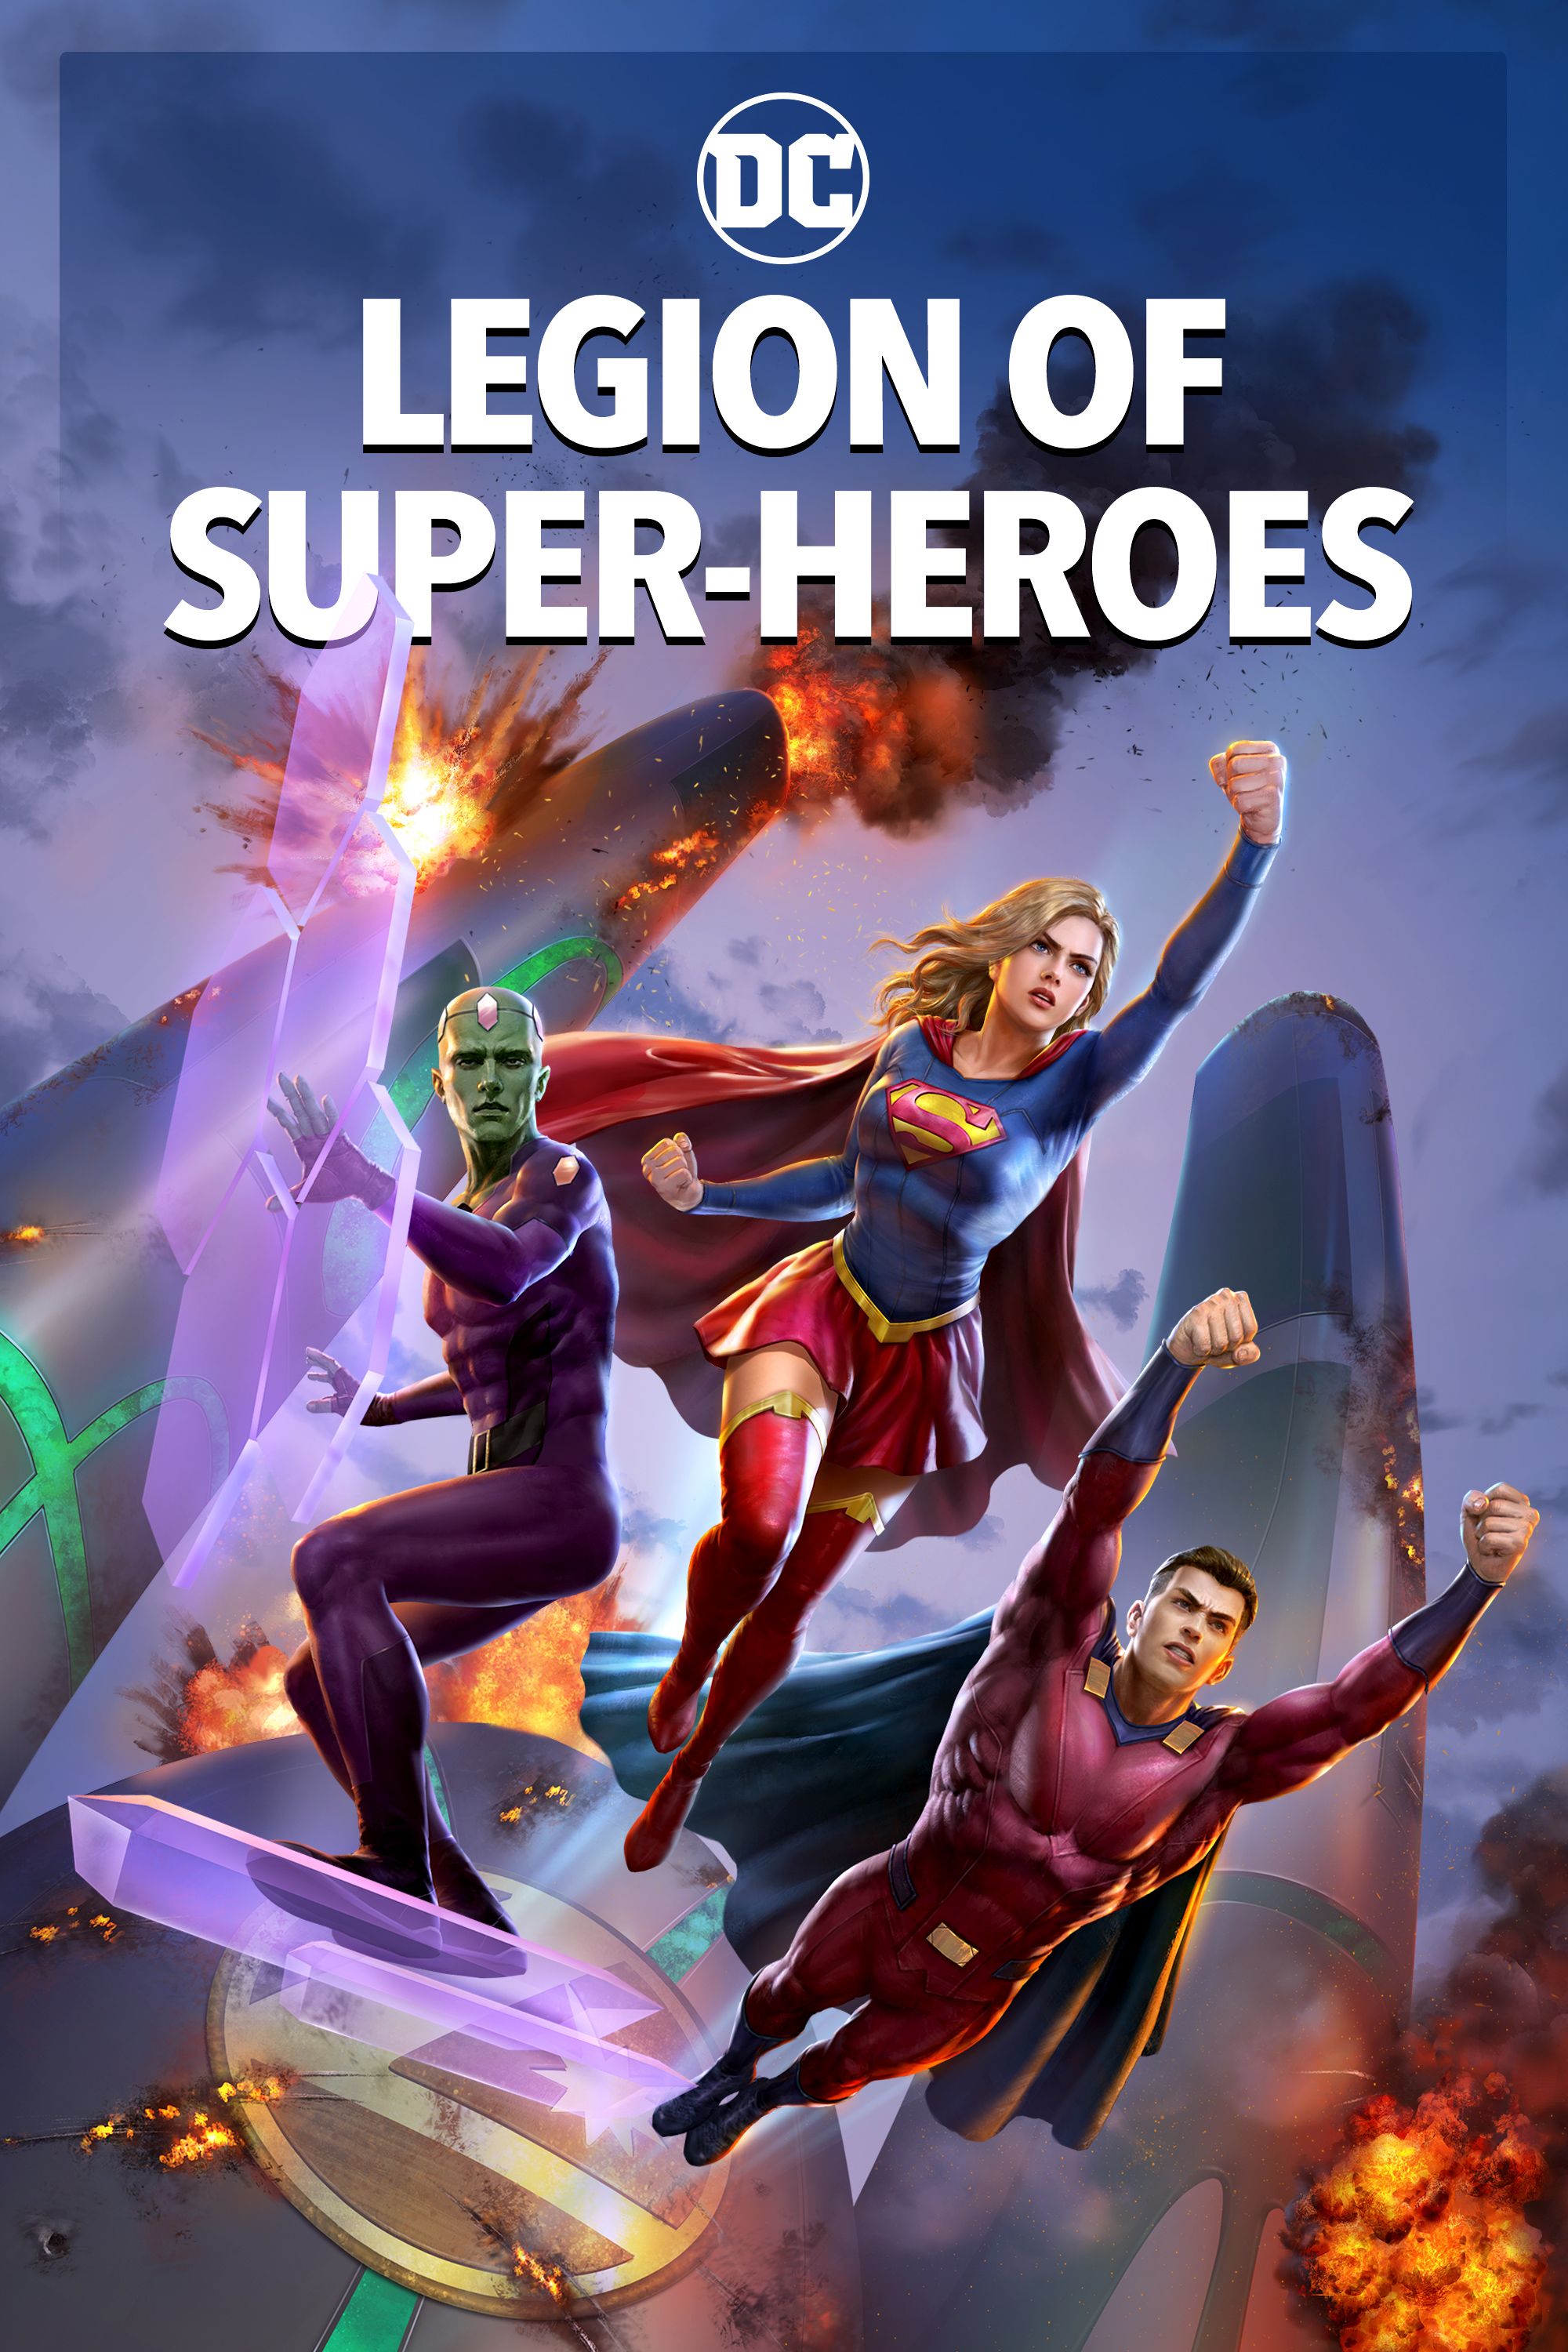 Legion of Super-Heroes (2022) English 720p BluRay 700MB ESubs Download